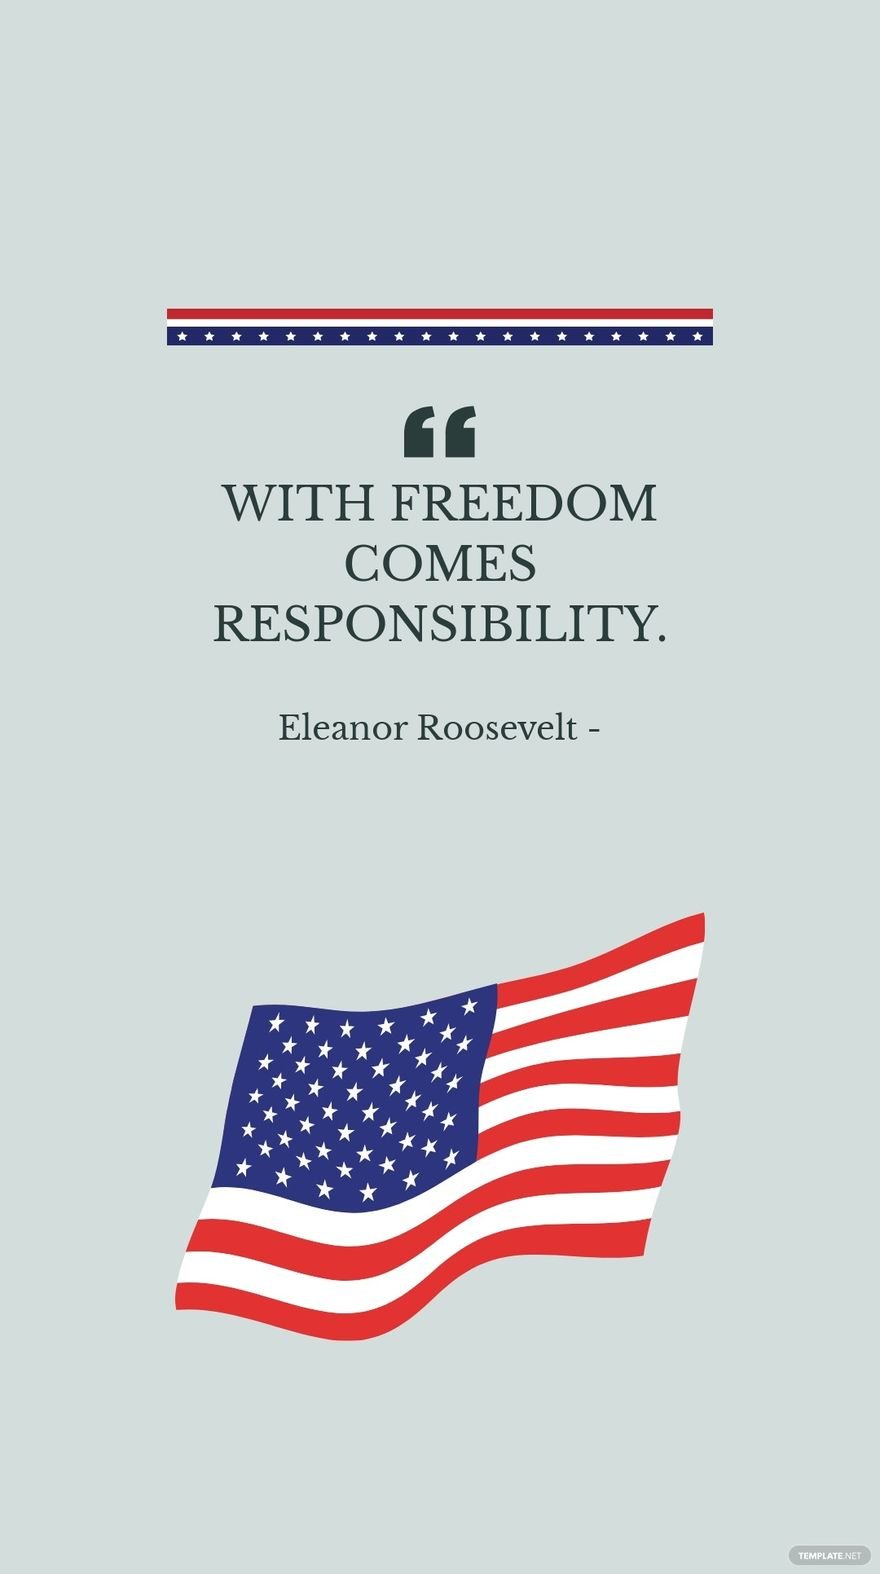 Eleanor Roosevelt - With freedom comes responsibility. in JPG